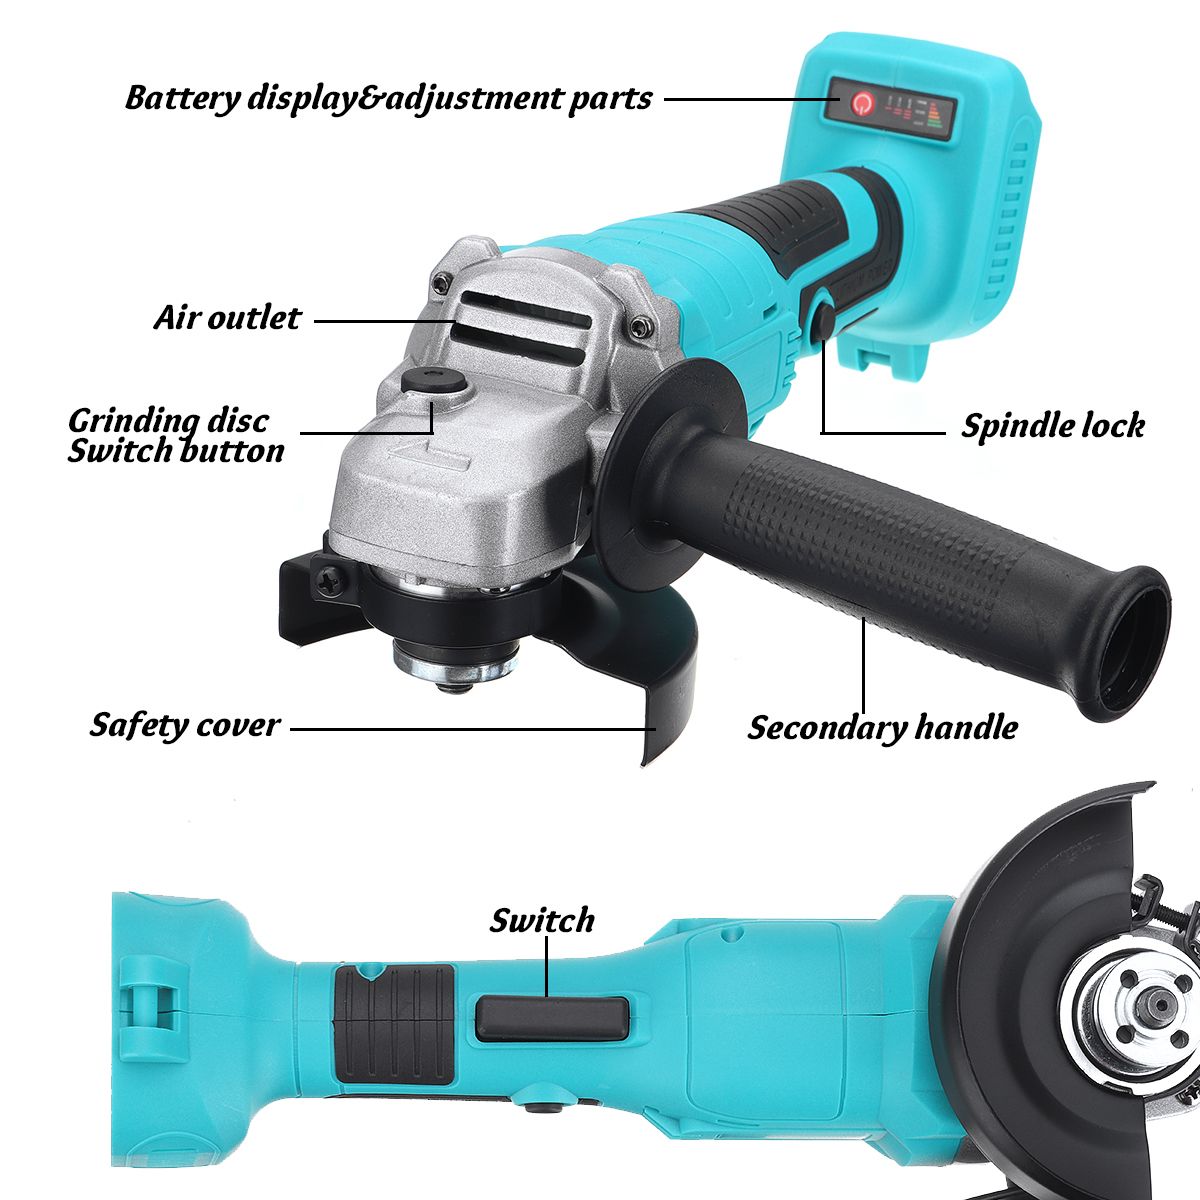 100mm-4-Brushless-Cordless-Electric-Angle-Grinder-Replace-For-18V-Makita-Li-ion-Battery-1644274